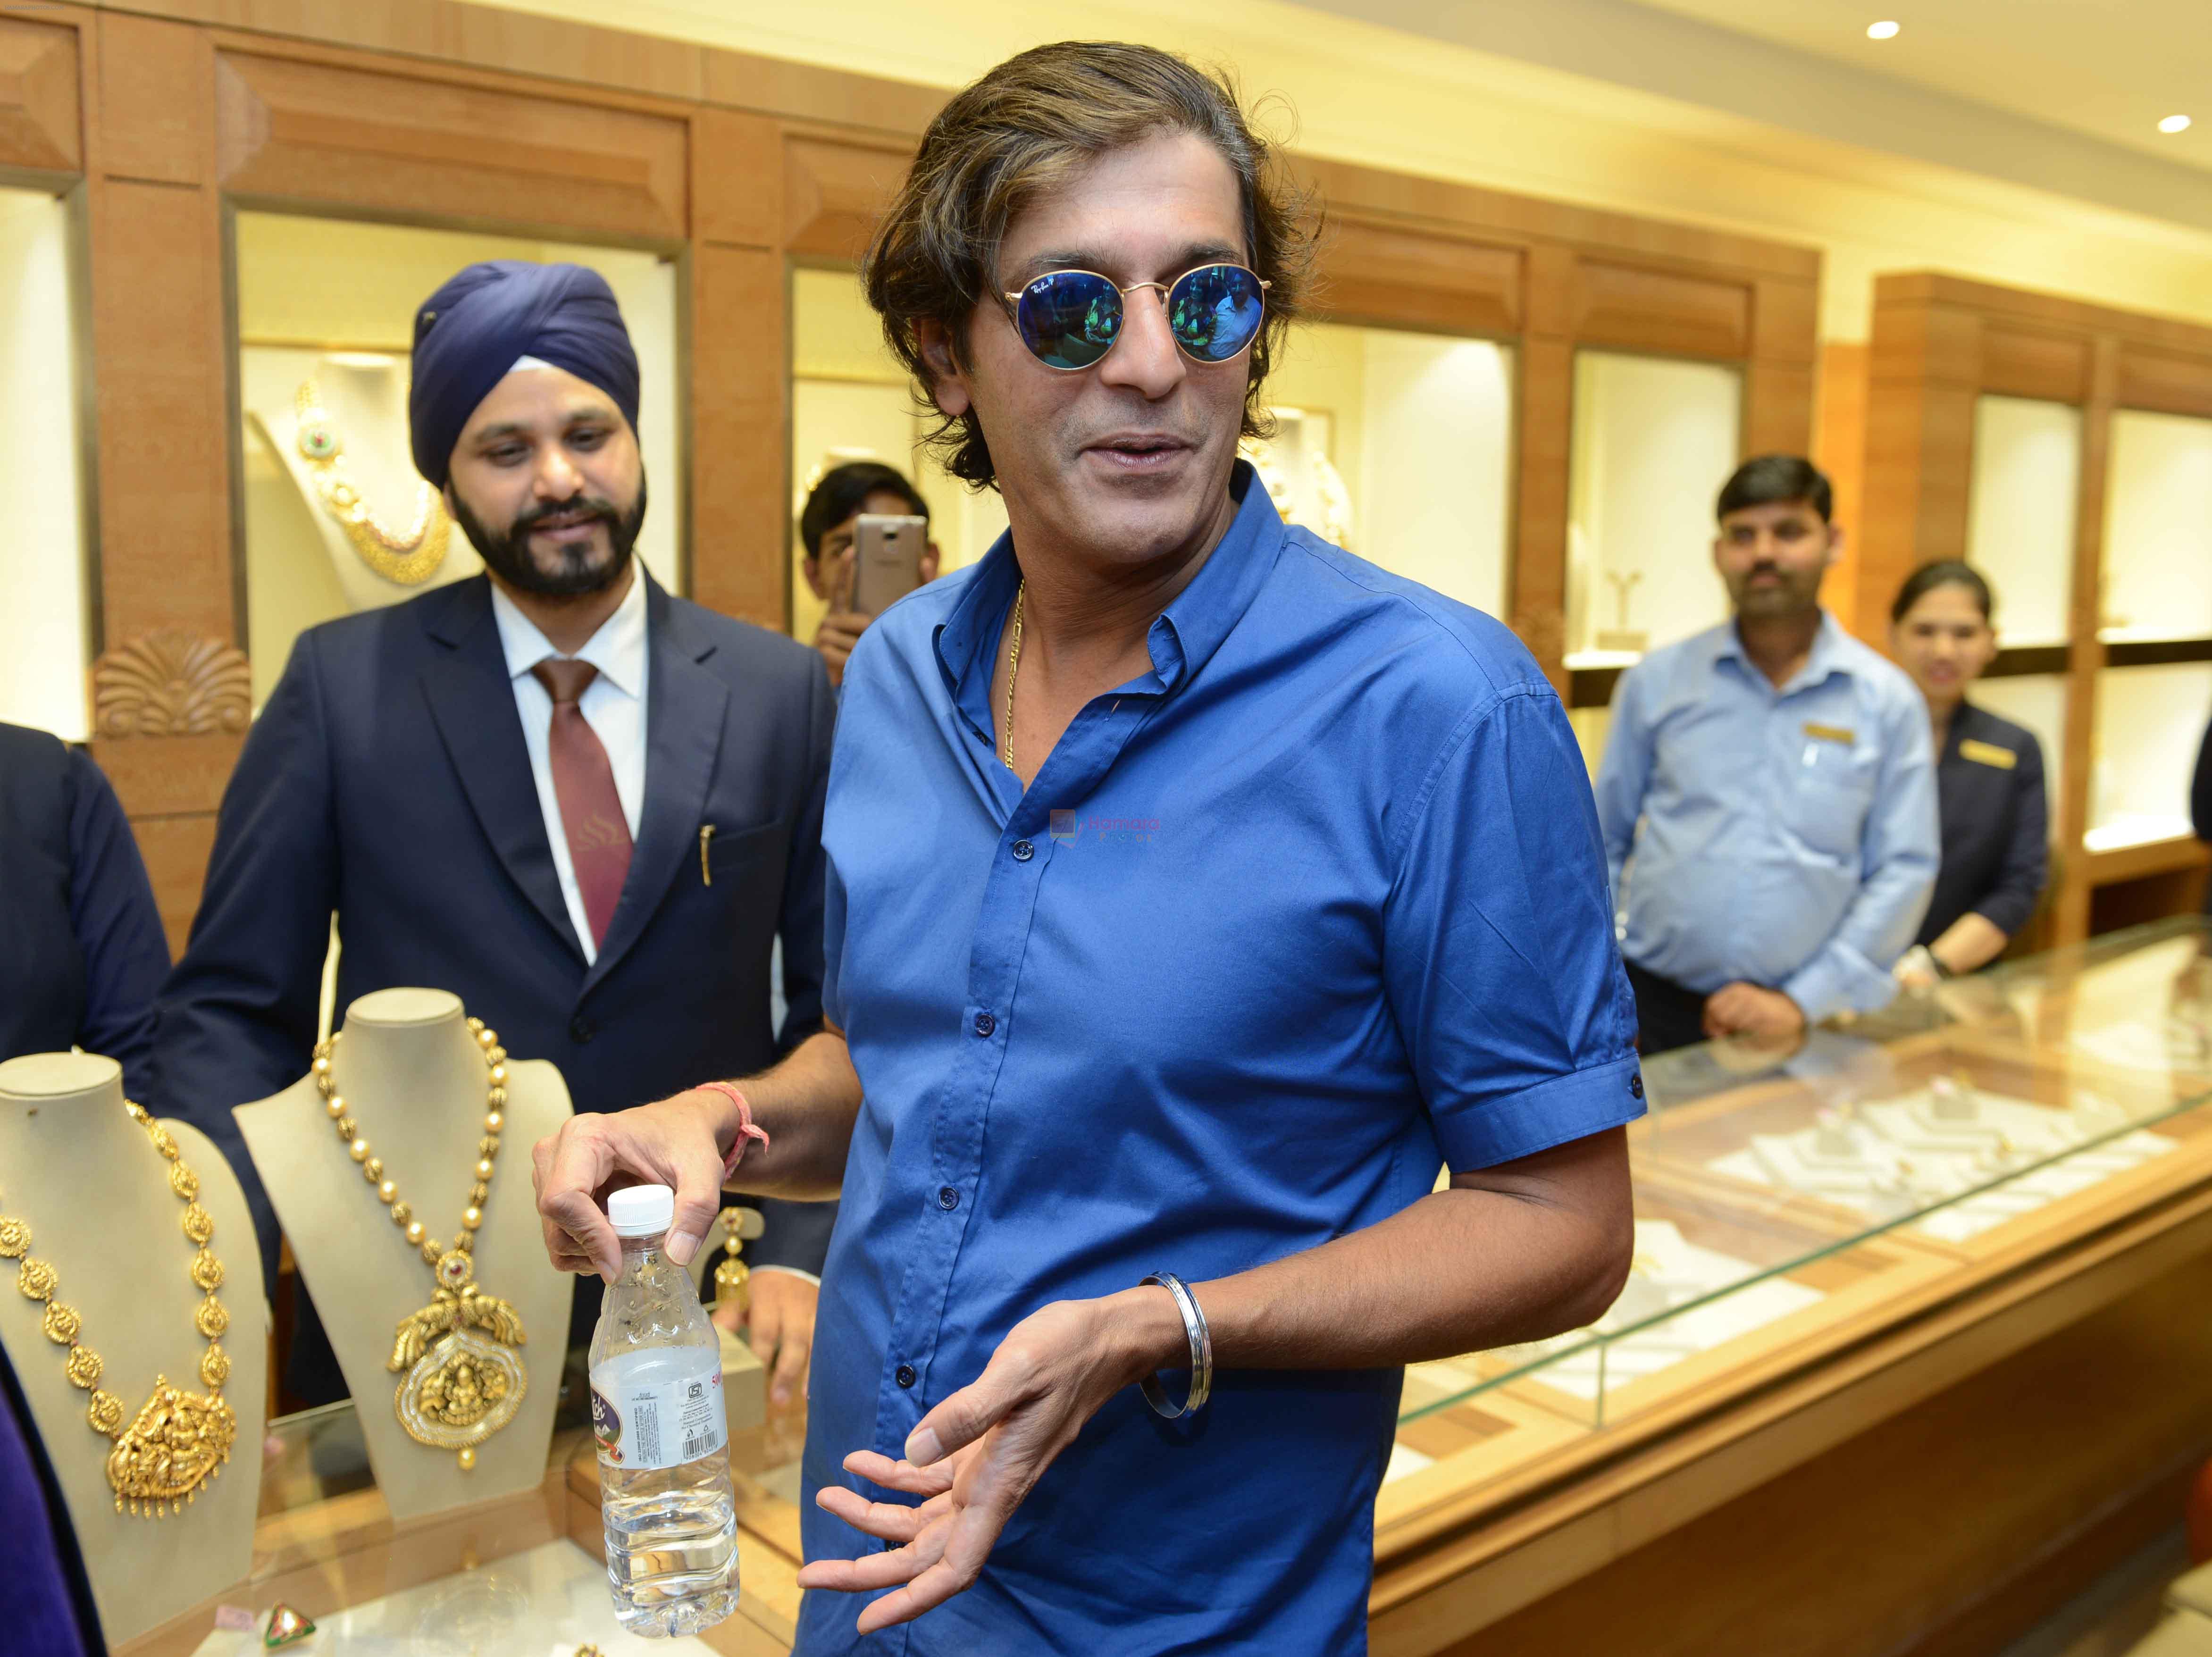 Chunky Pandey at the launch of  Sunar jewellery shop Karol Bagh in New Delhi on 22nd April 2015